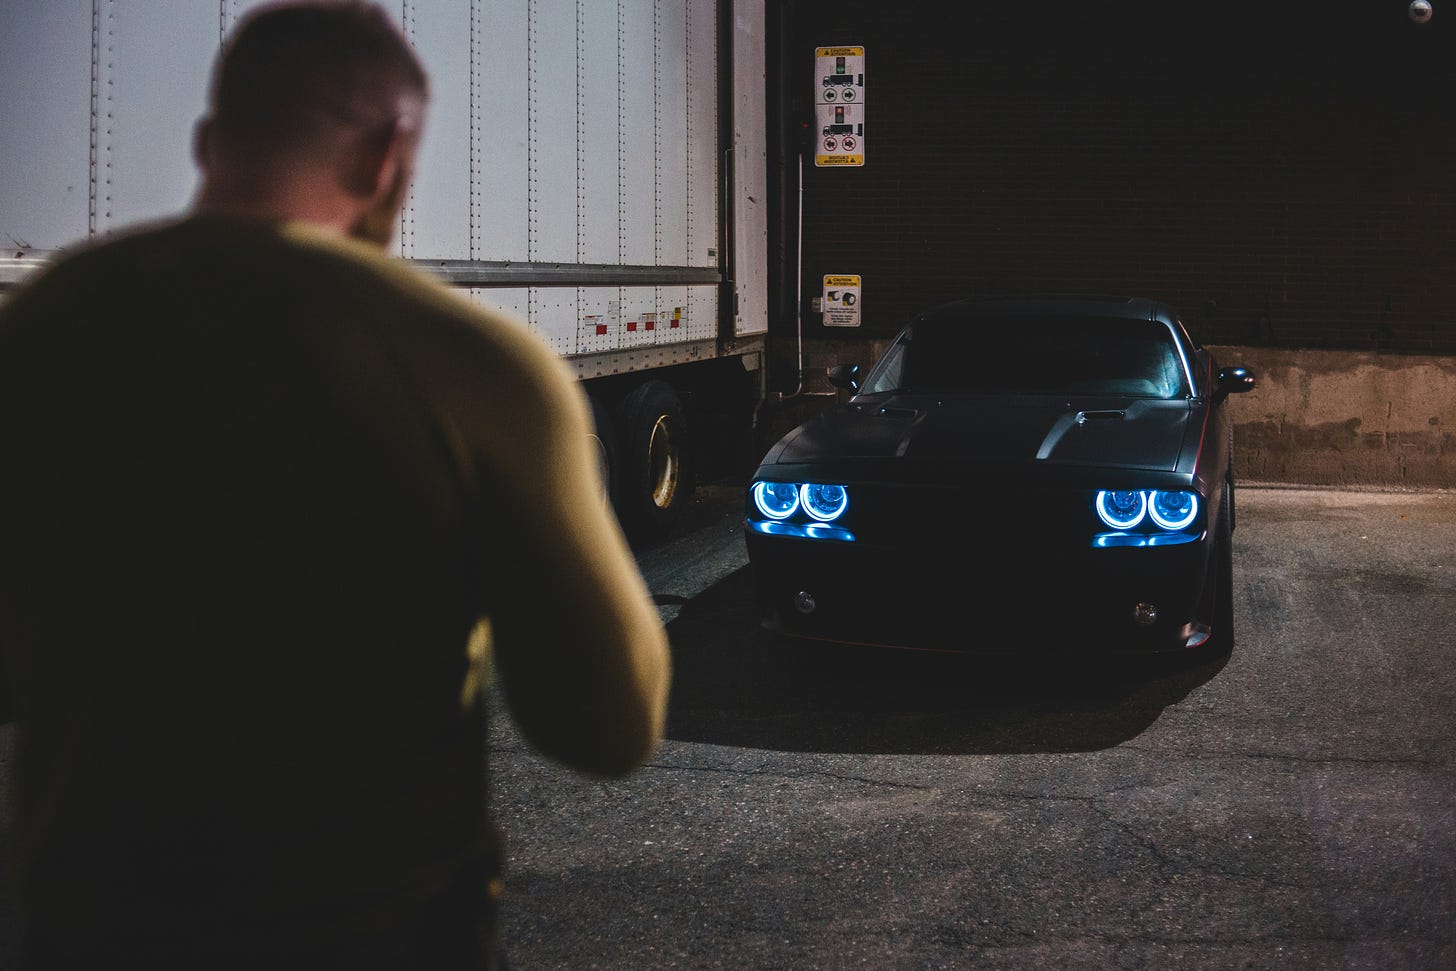 A man stands in front of a black car with a semi-trailer beside the car, at night.